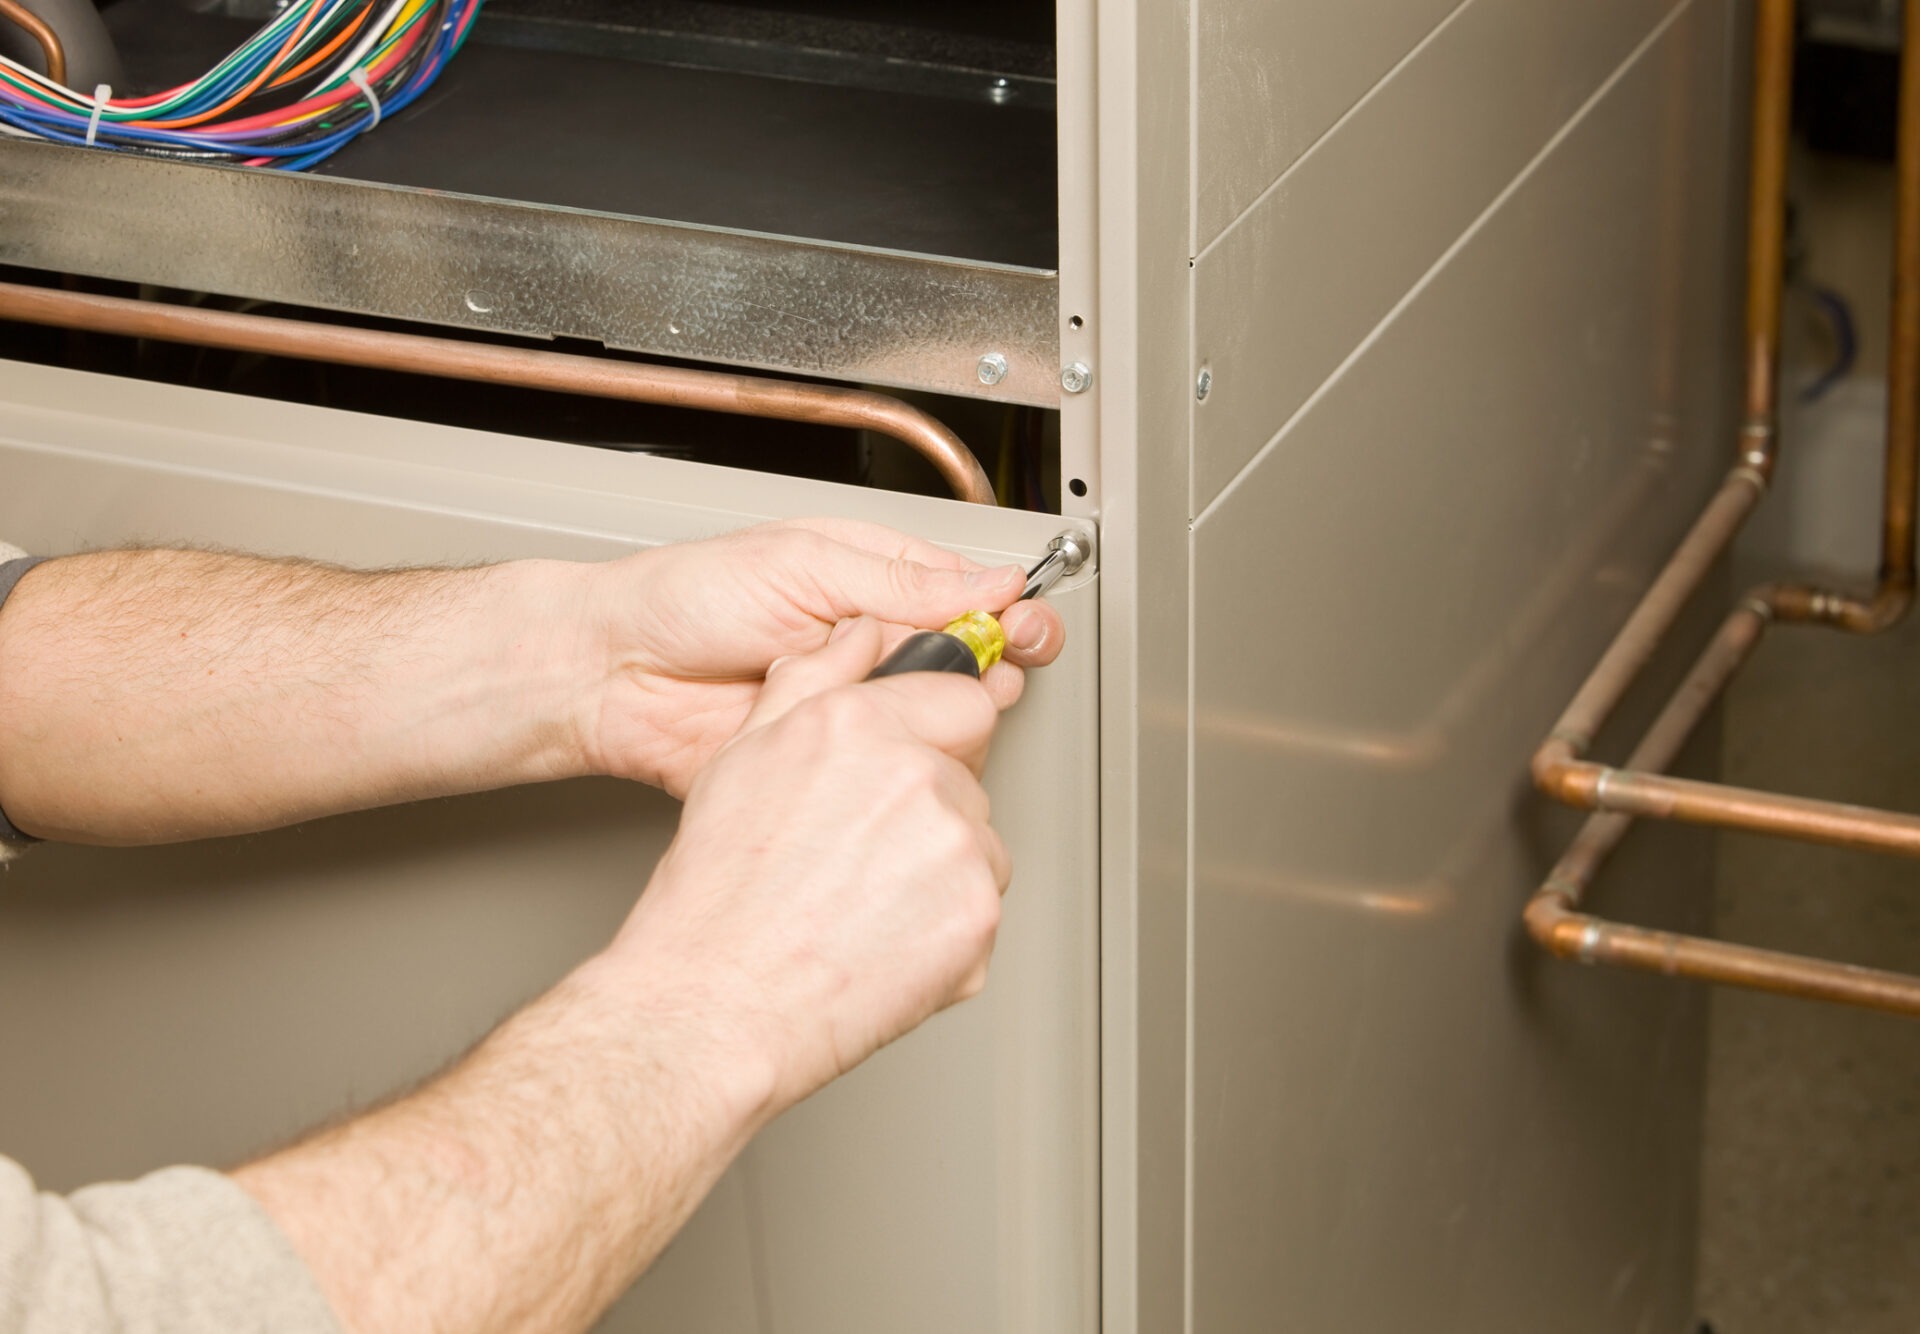 A person is using a screwdriver to work on a beige HVAC unit, with visible wires and copper pipes in the background.